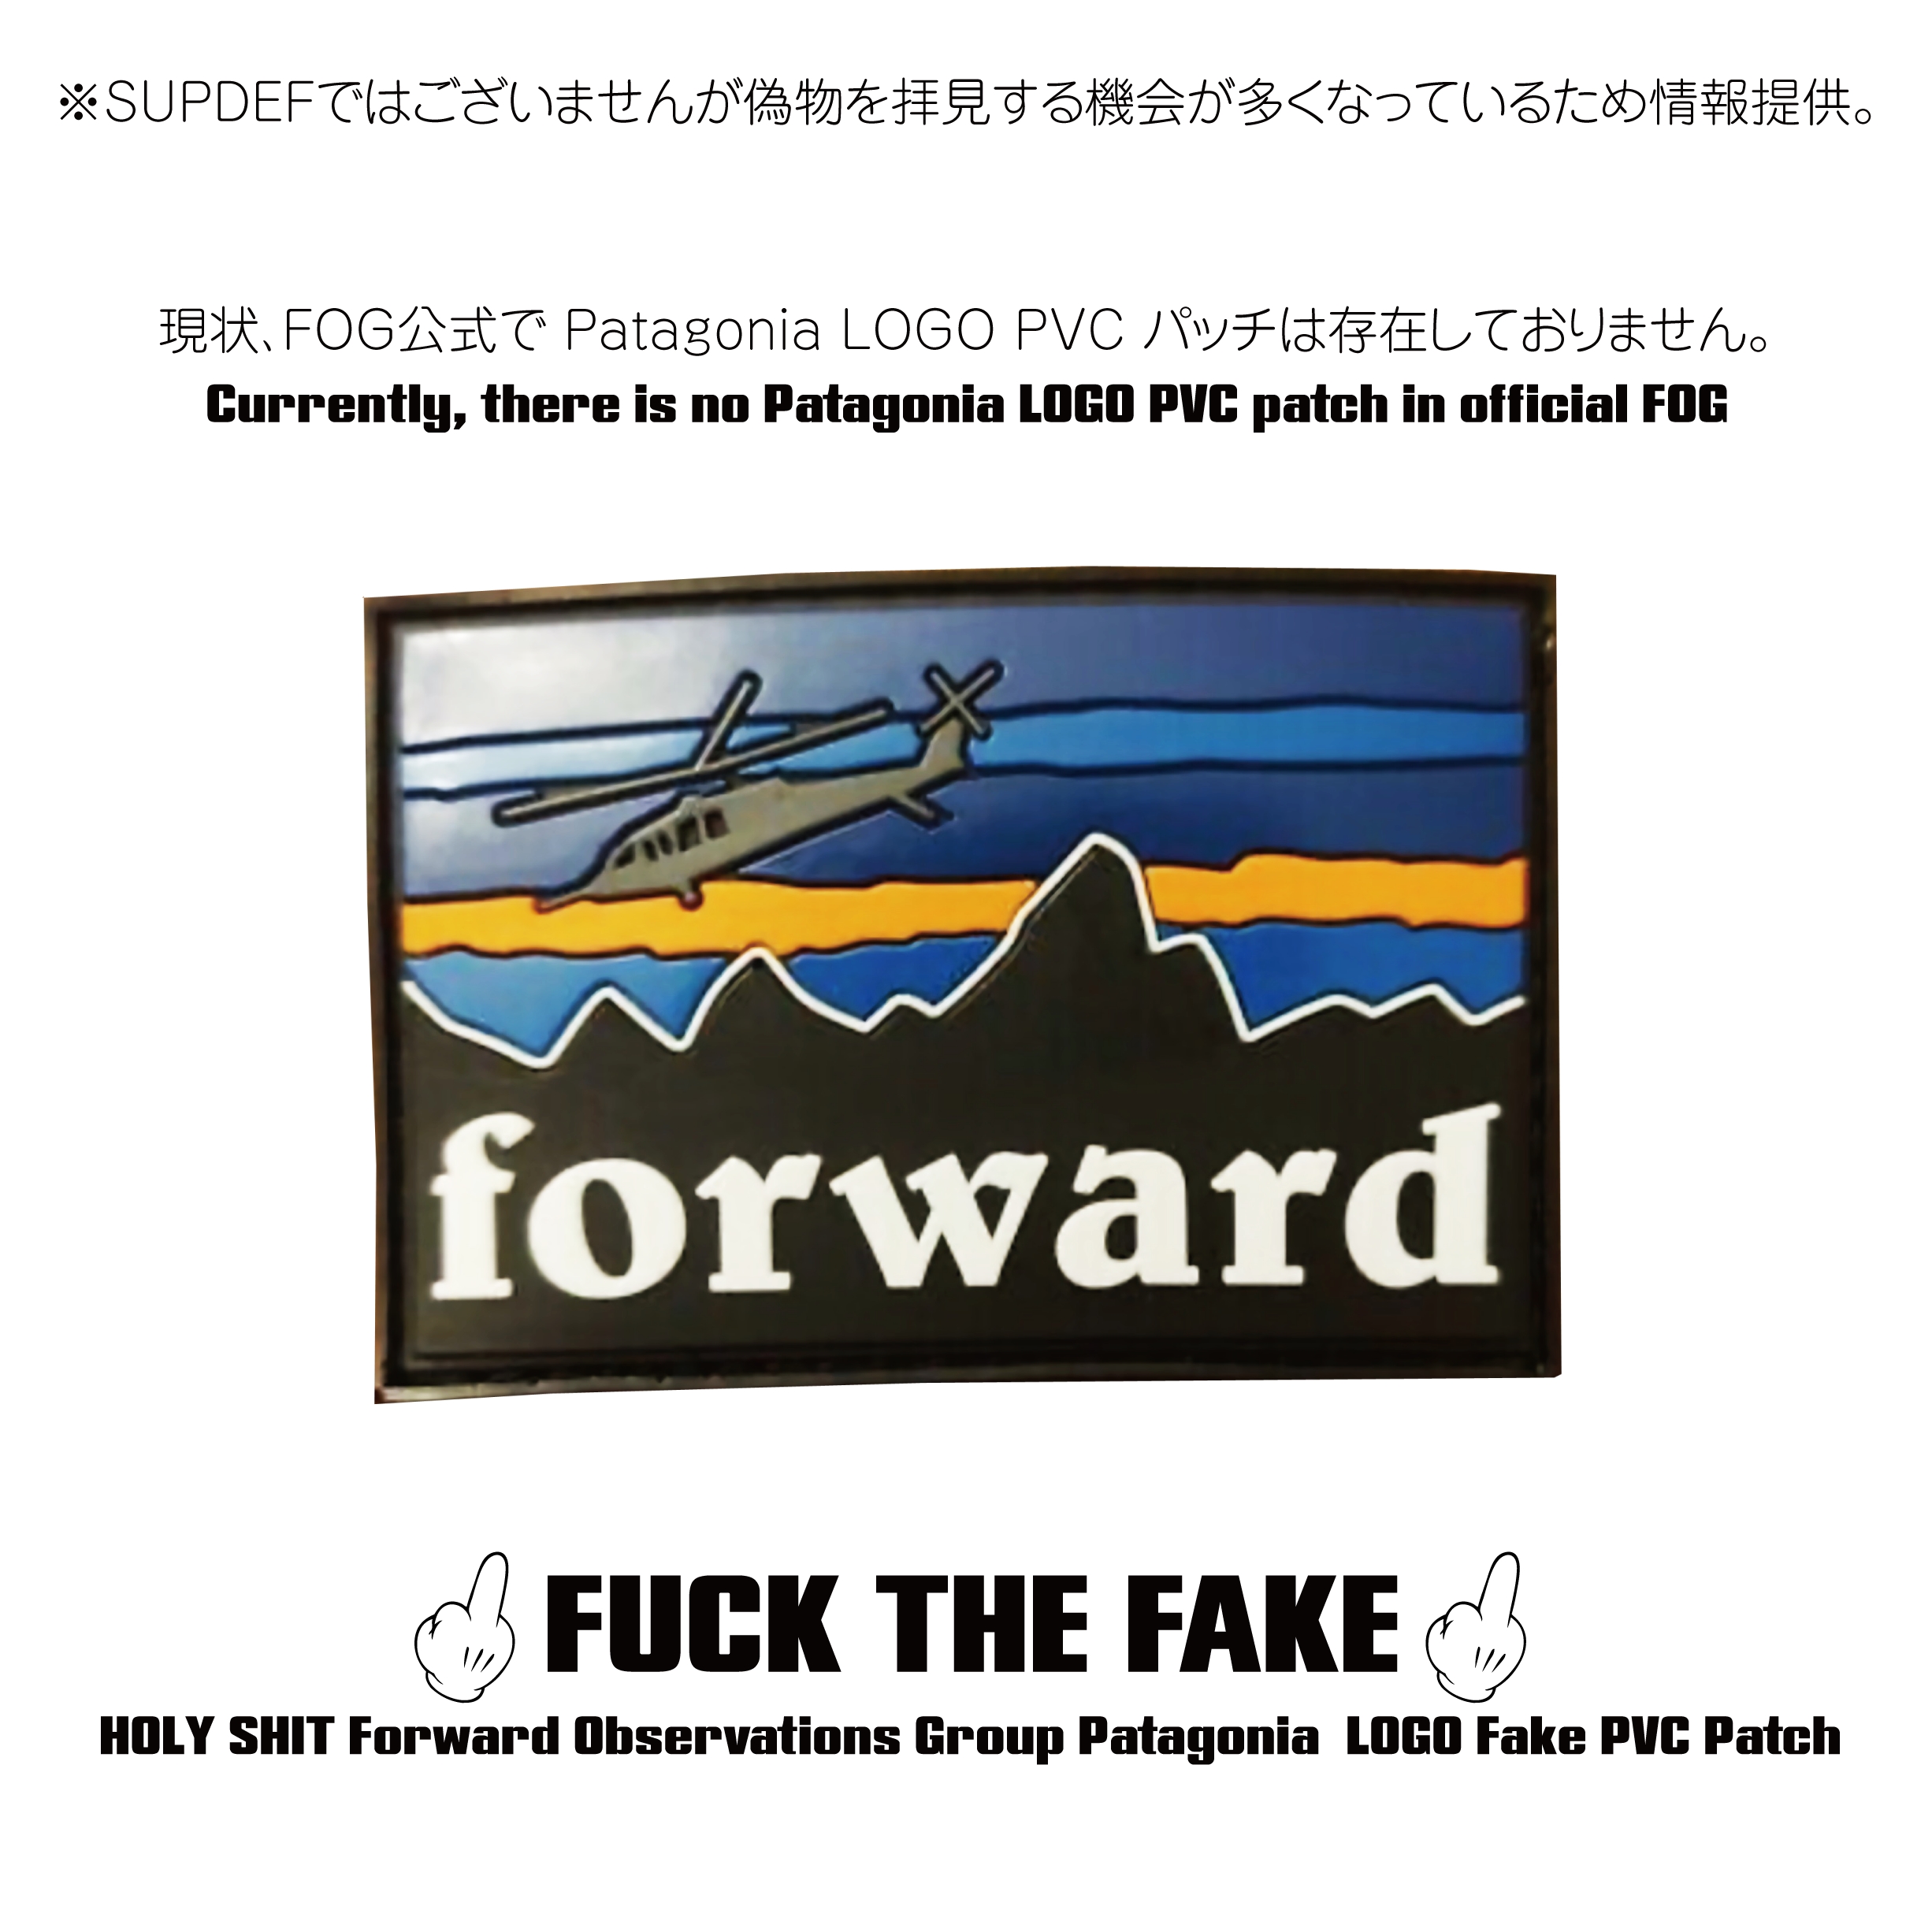 Forward Observations Group Patagonia LOGO PVC Patch REAL or FAKE FUCK THE FAKE